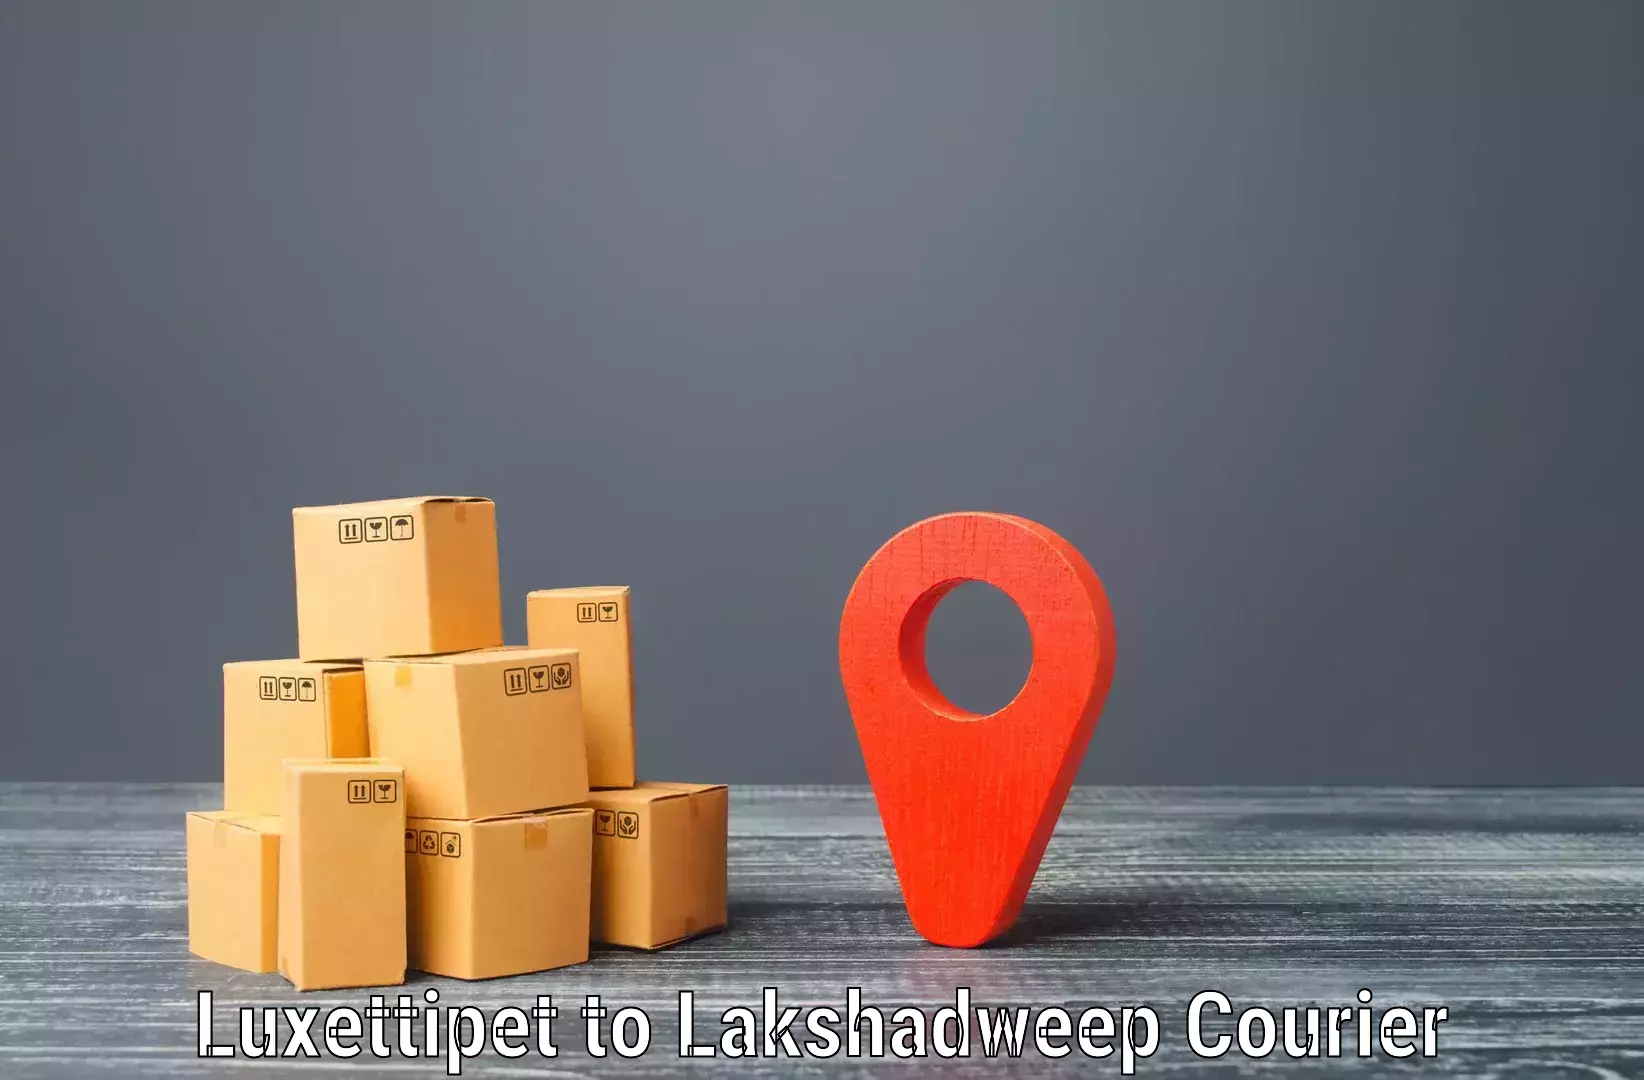 Customizable shipping options Luxettipet to Lakshadweep